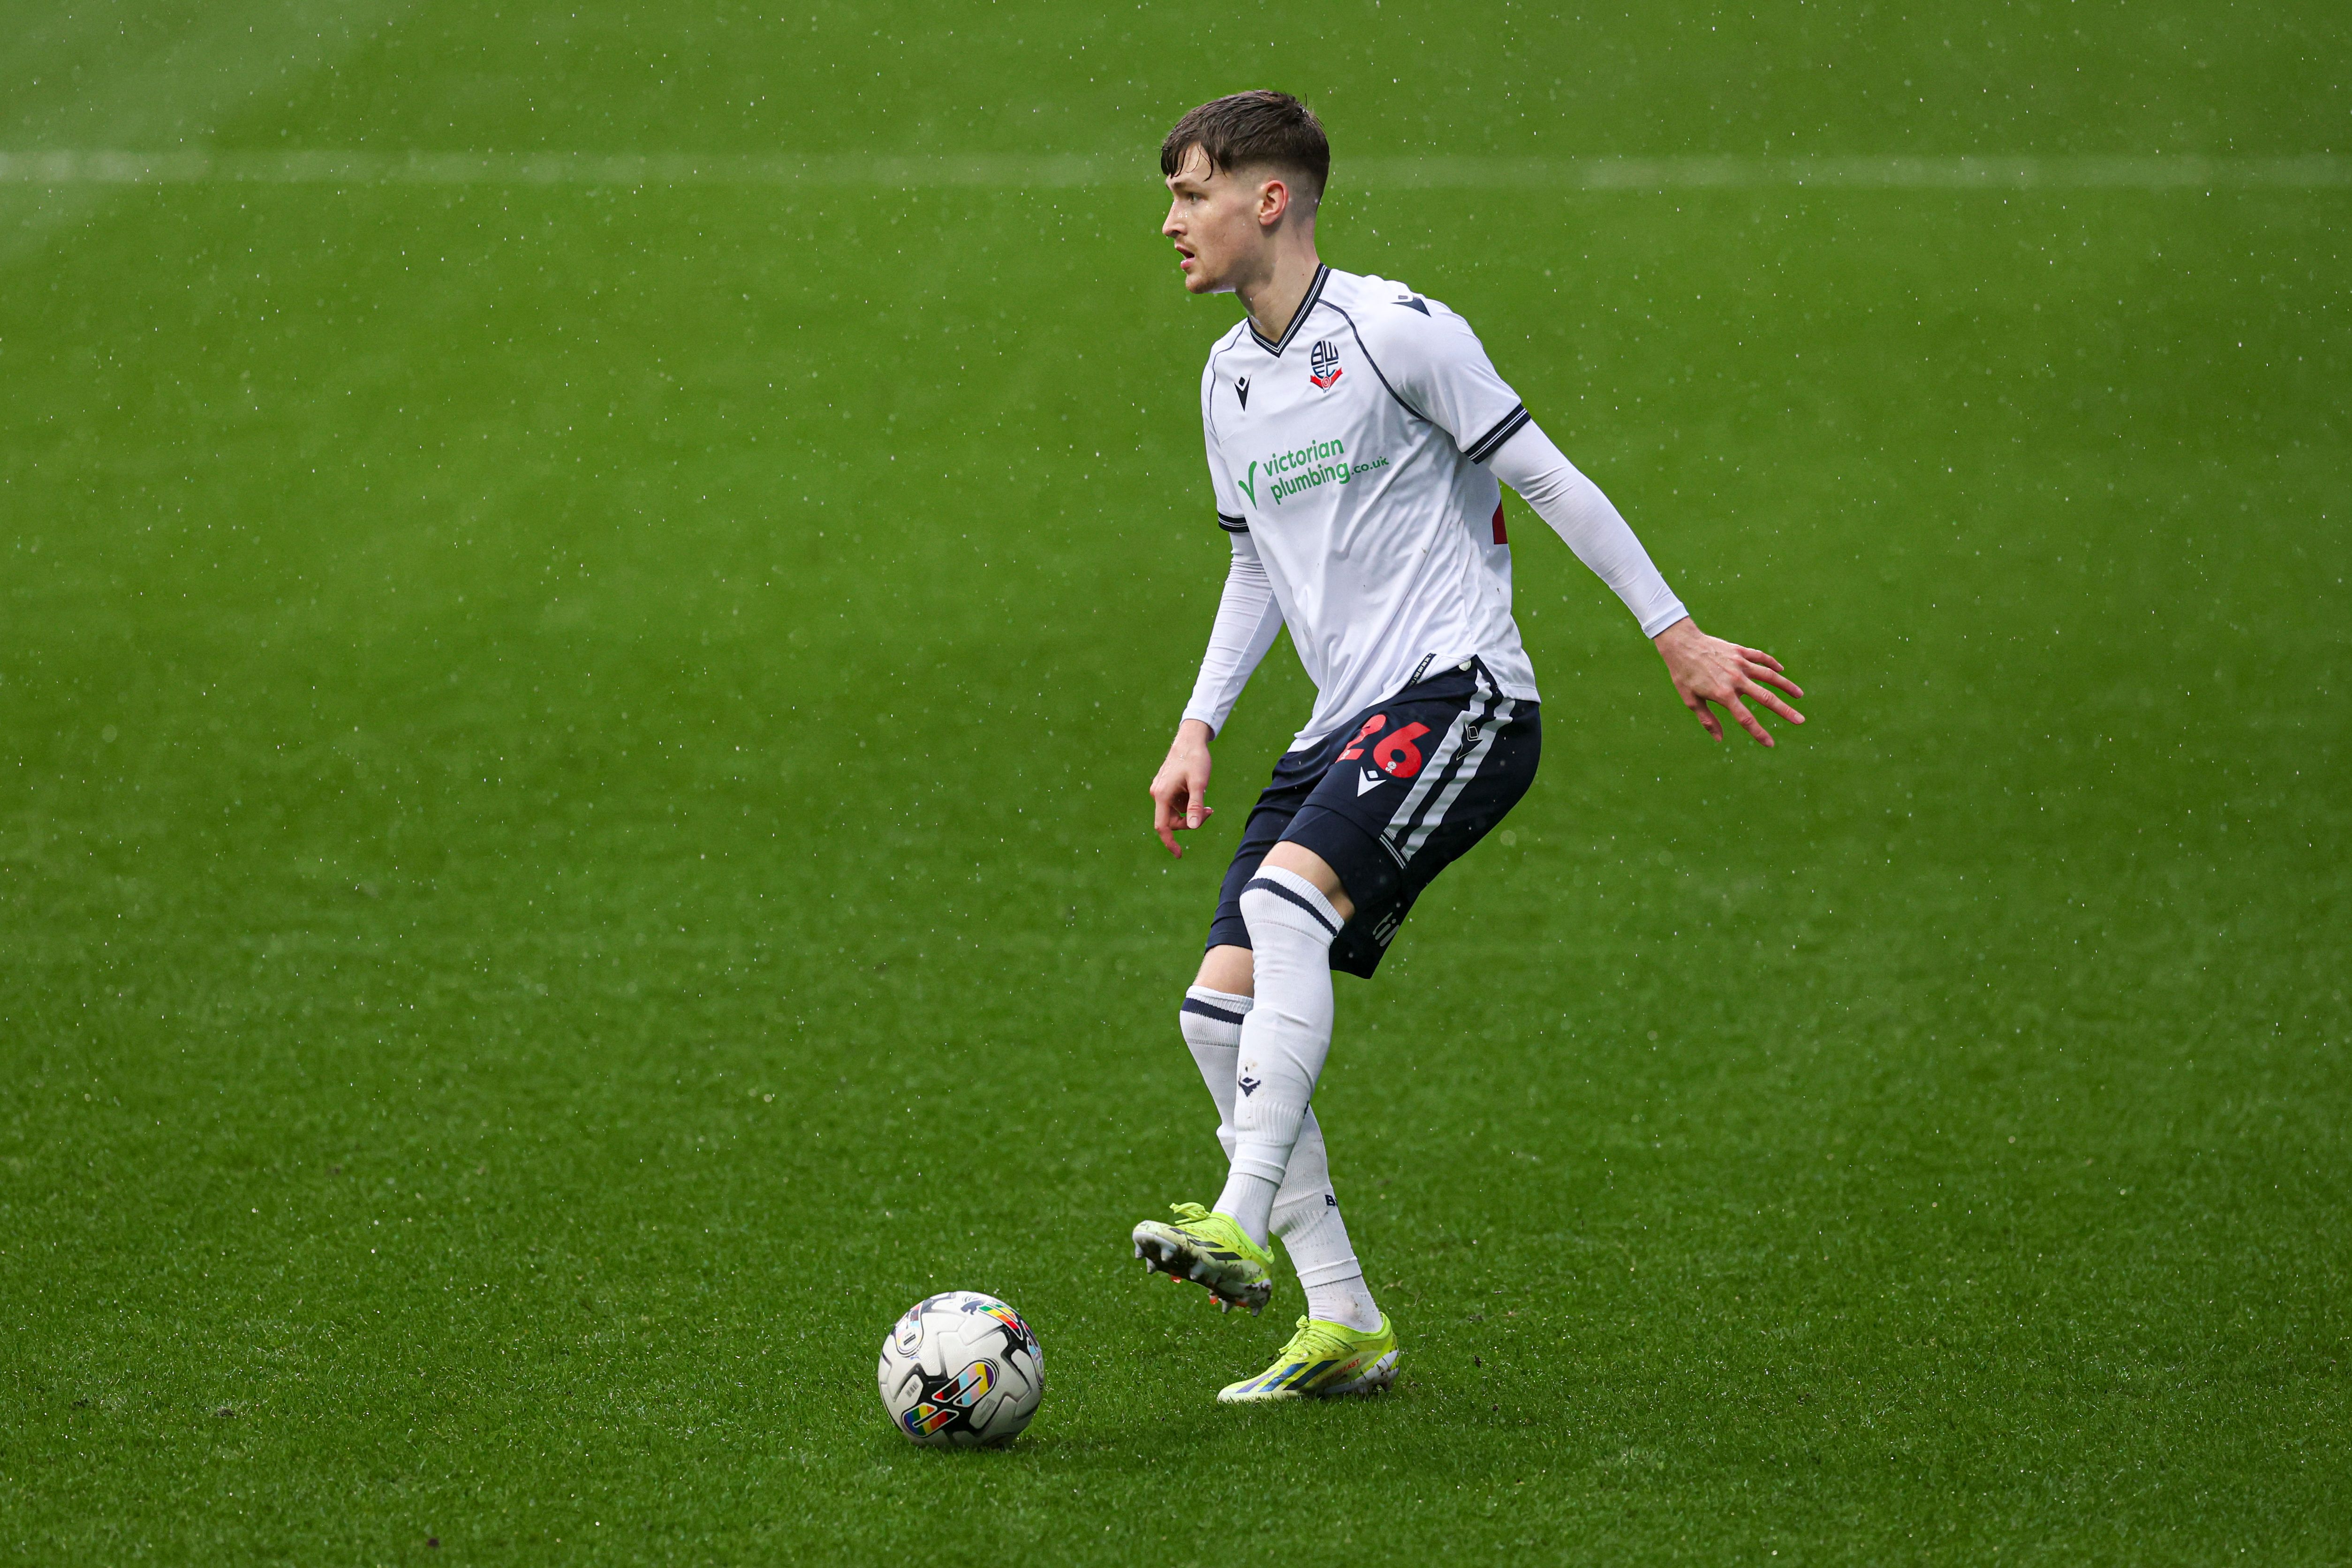 Zac Ashworth on the ball while playing for Bolton